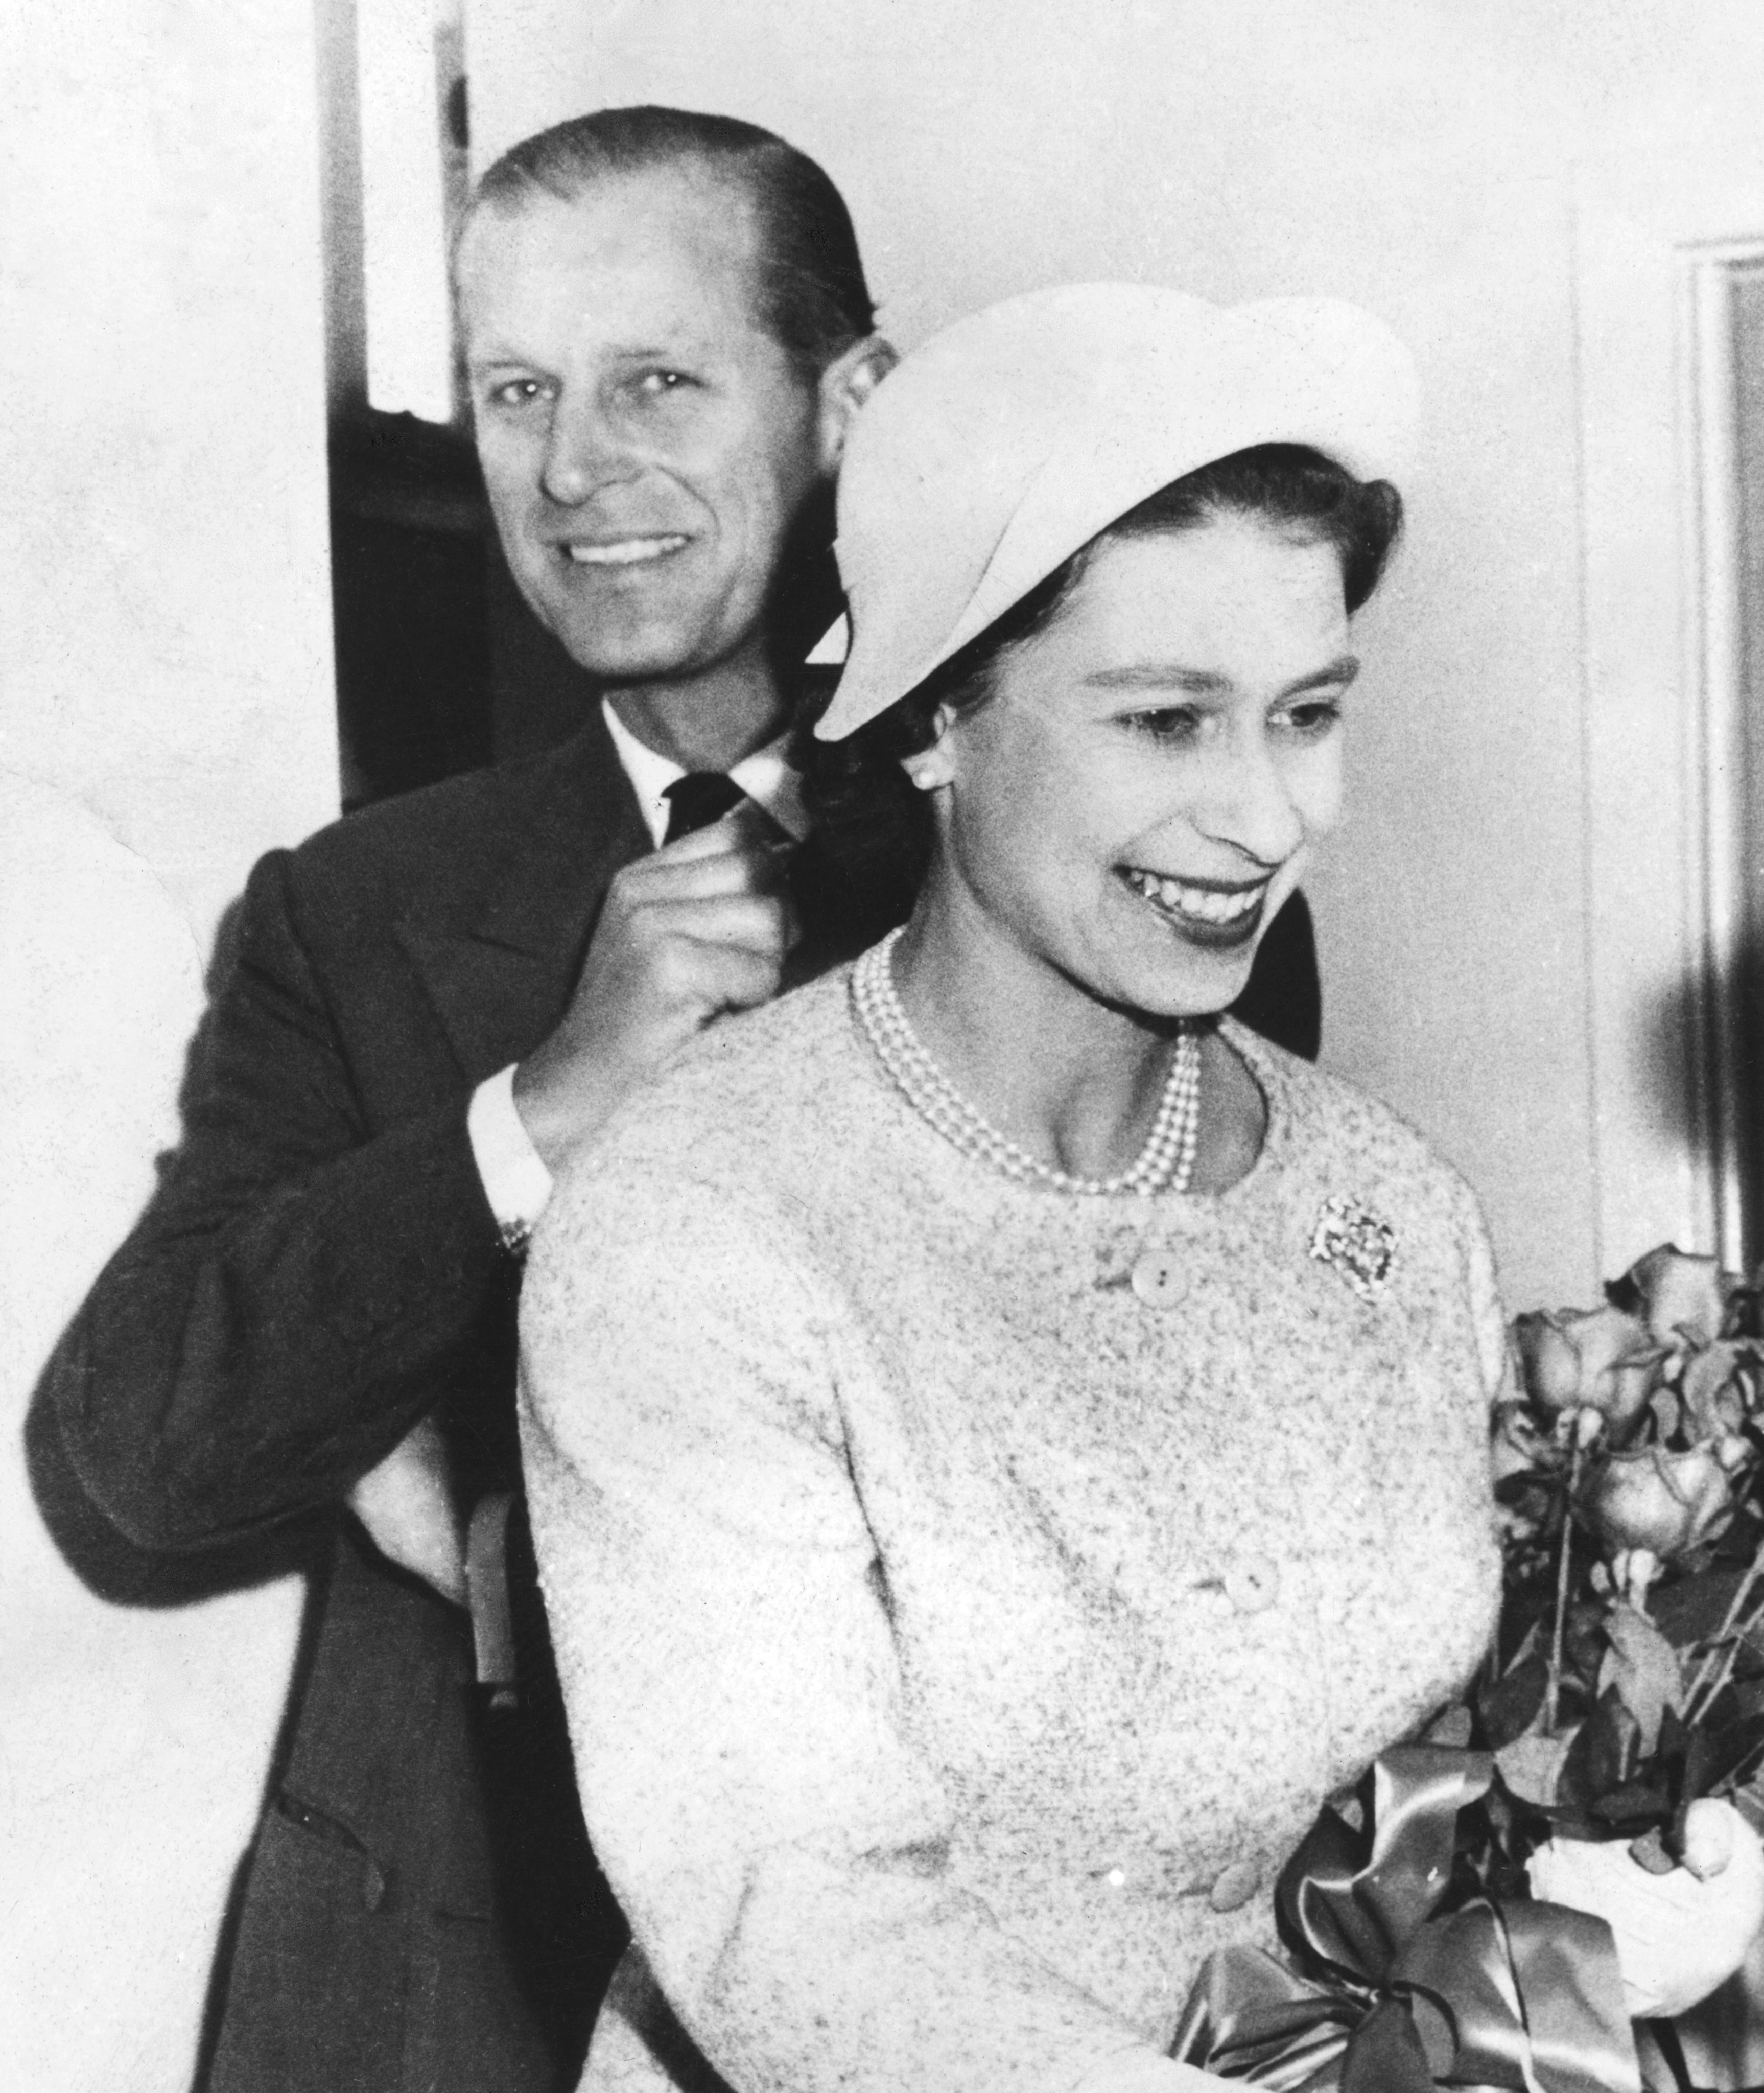 The Queen and the Duke share a smile during a tour of Canada in 1959